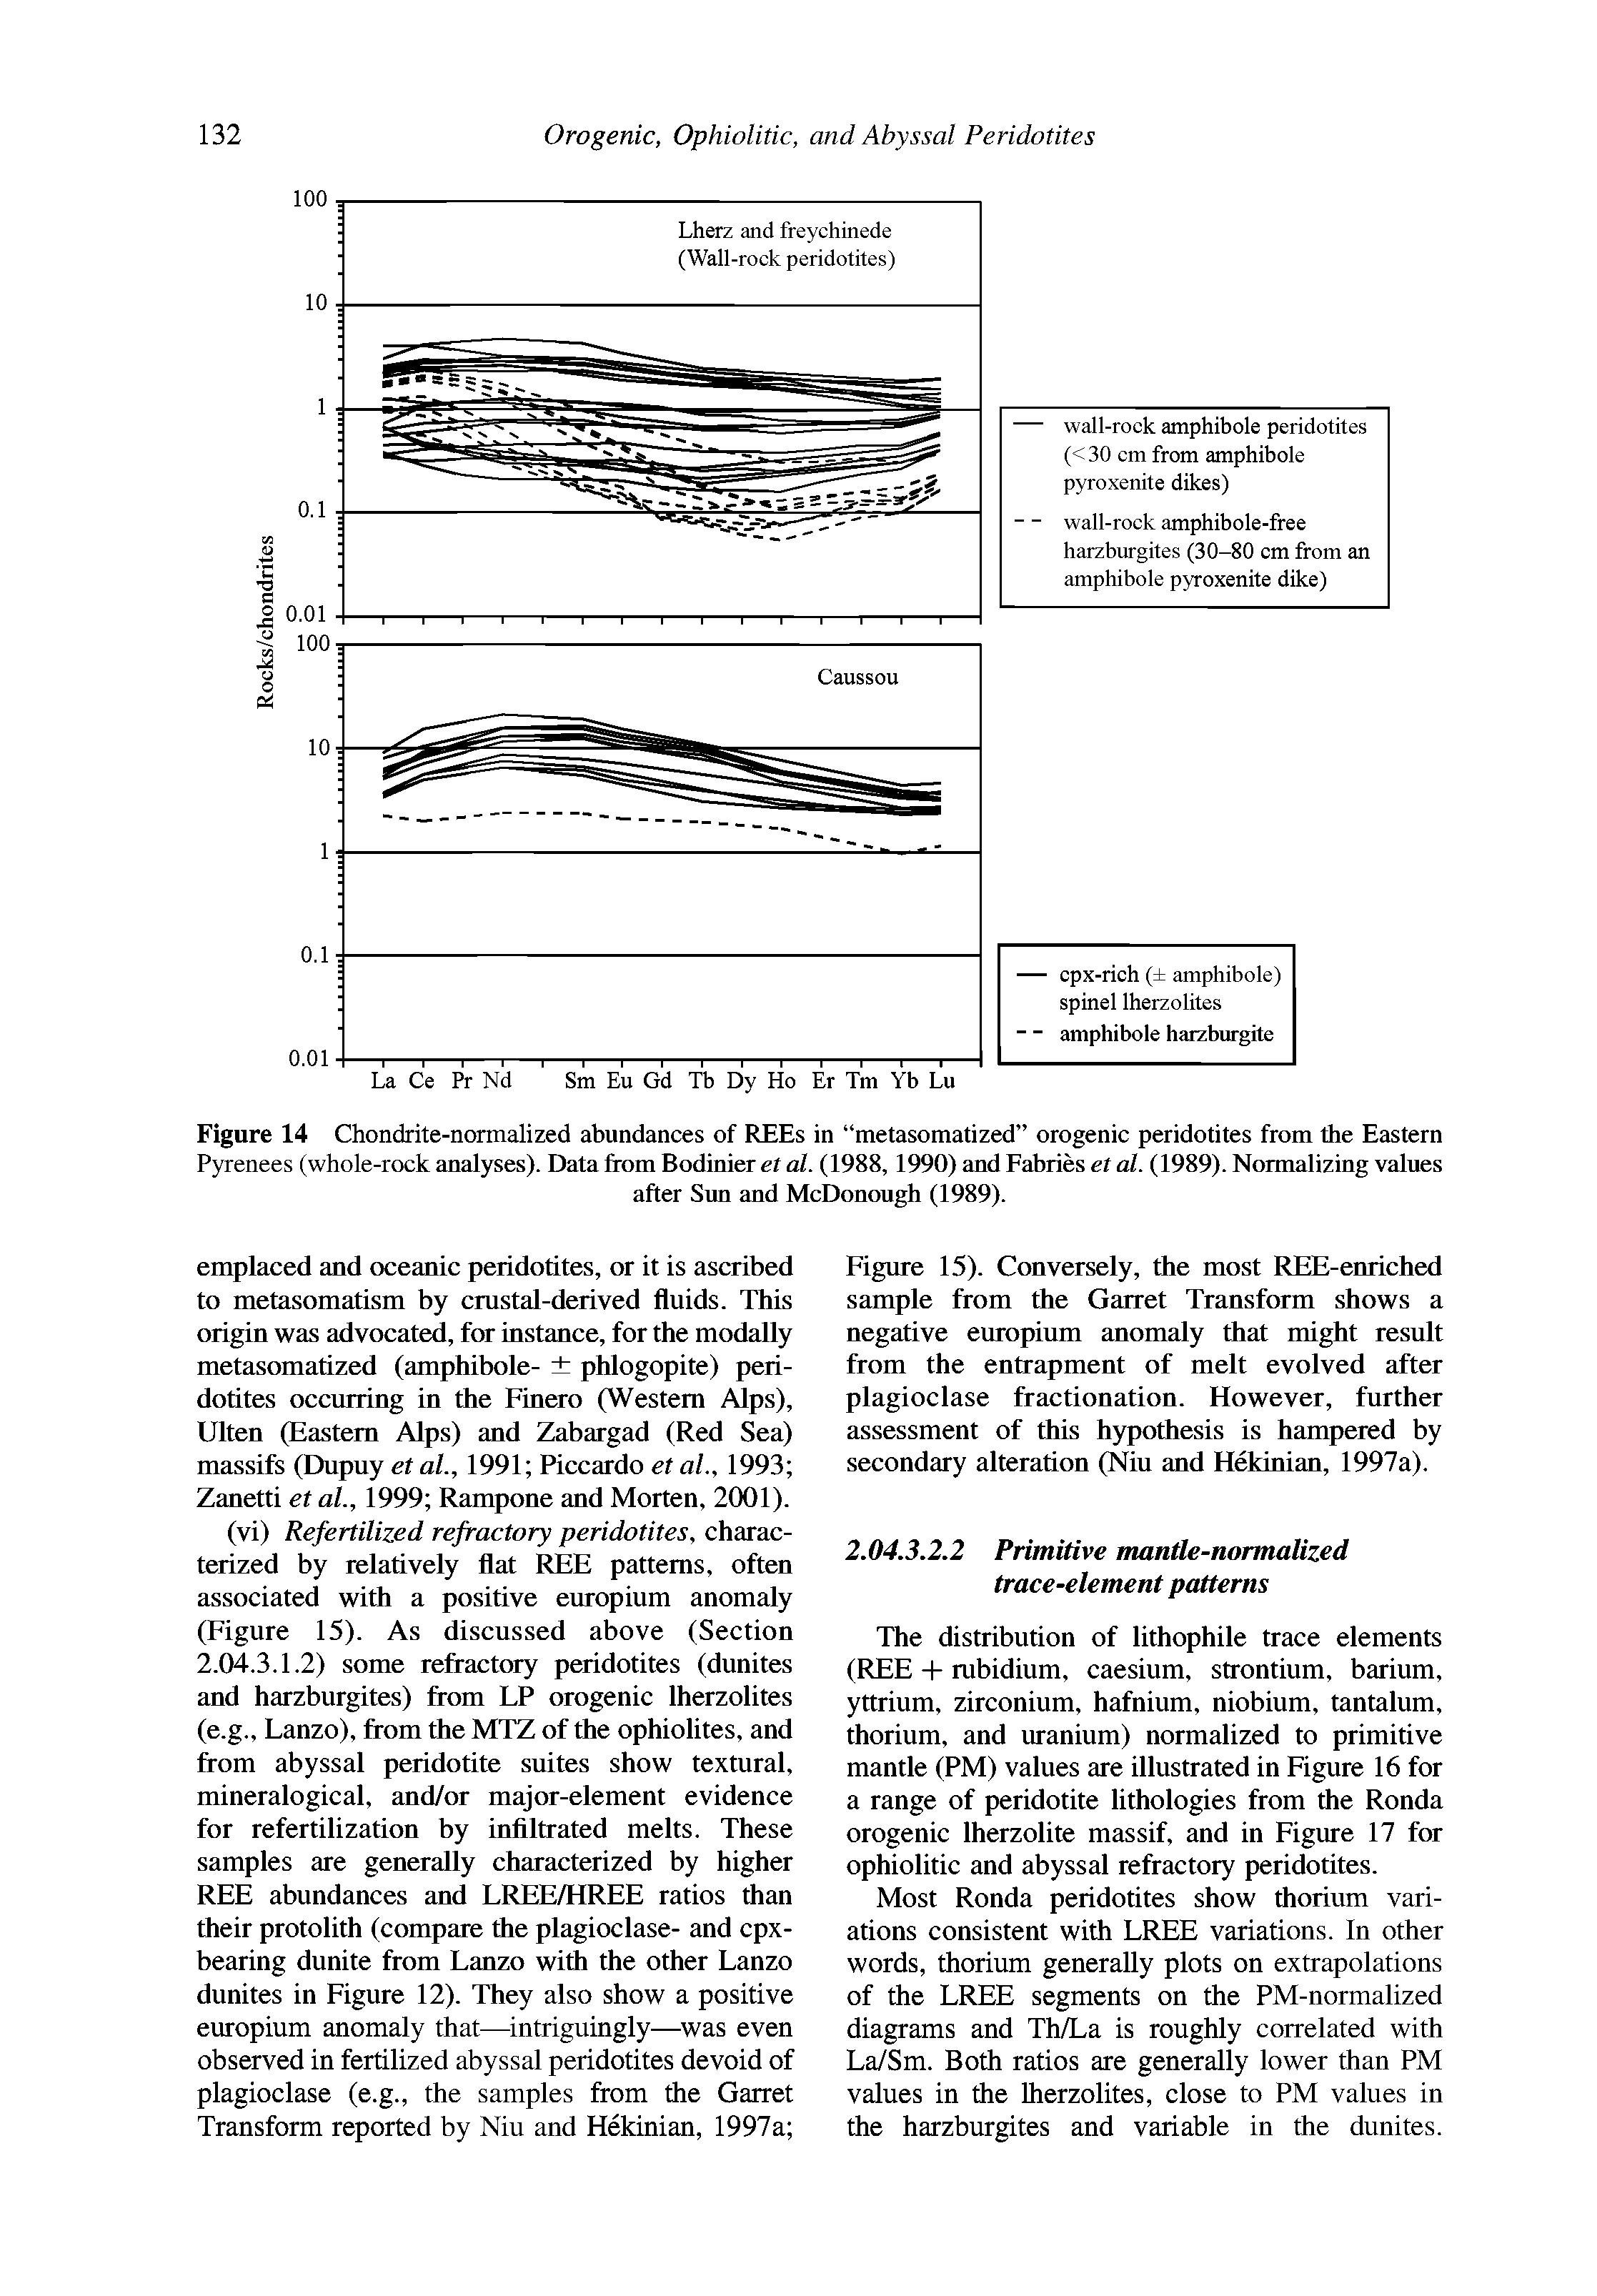 Figure 15). Conversely, the most REE-enriched sample from the Garret Transform shows a negative europium anomaly that might result from the entrapment of melt evolved after plagioclase fractionation. However, further assessment of this hypothesis is hampered by secondary alteration (Niu and Hekinian, 1997a).